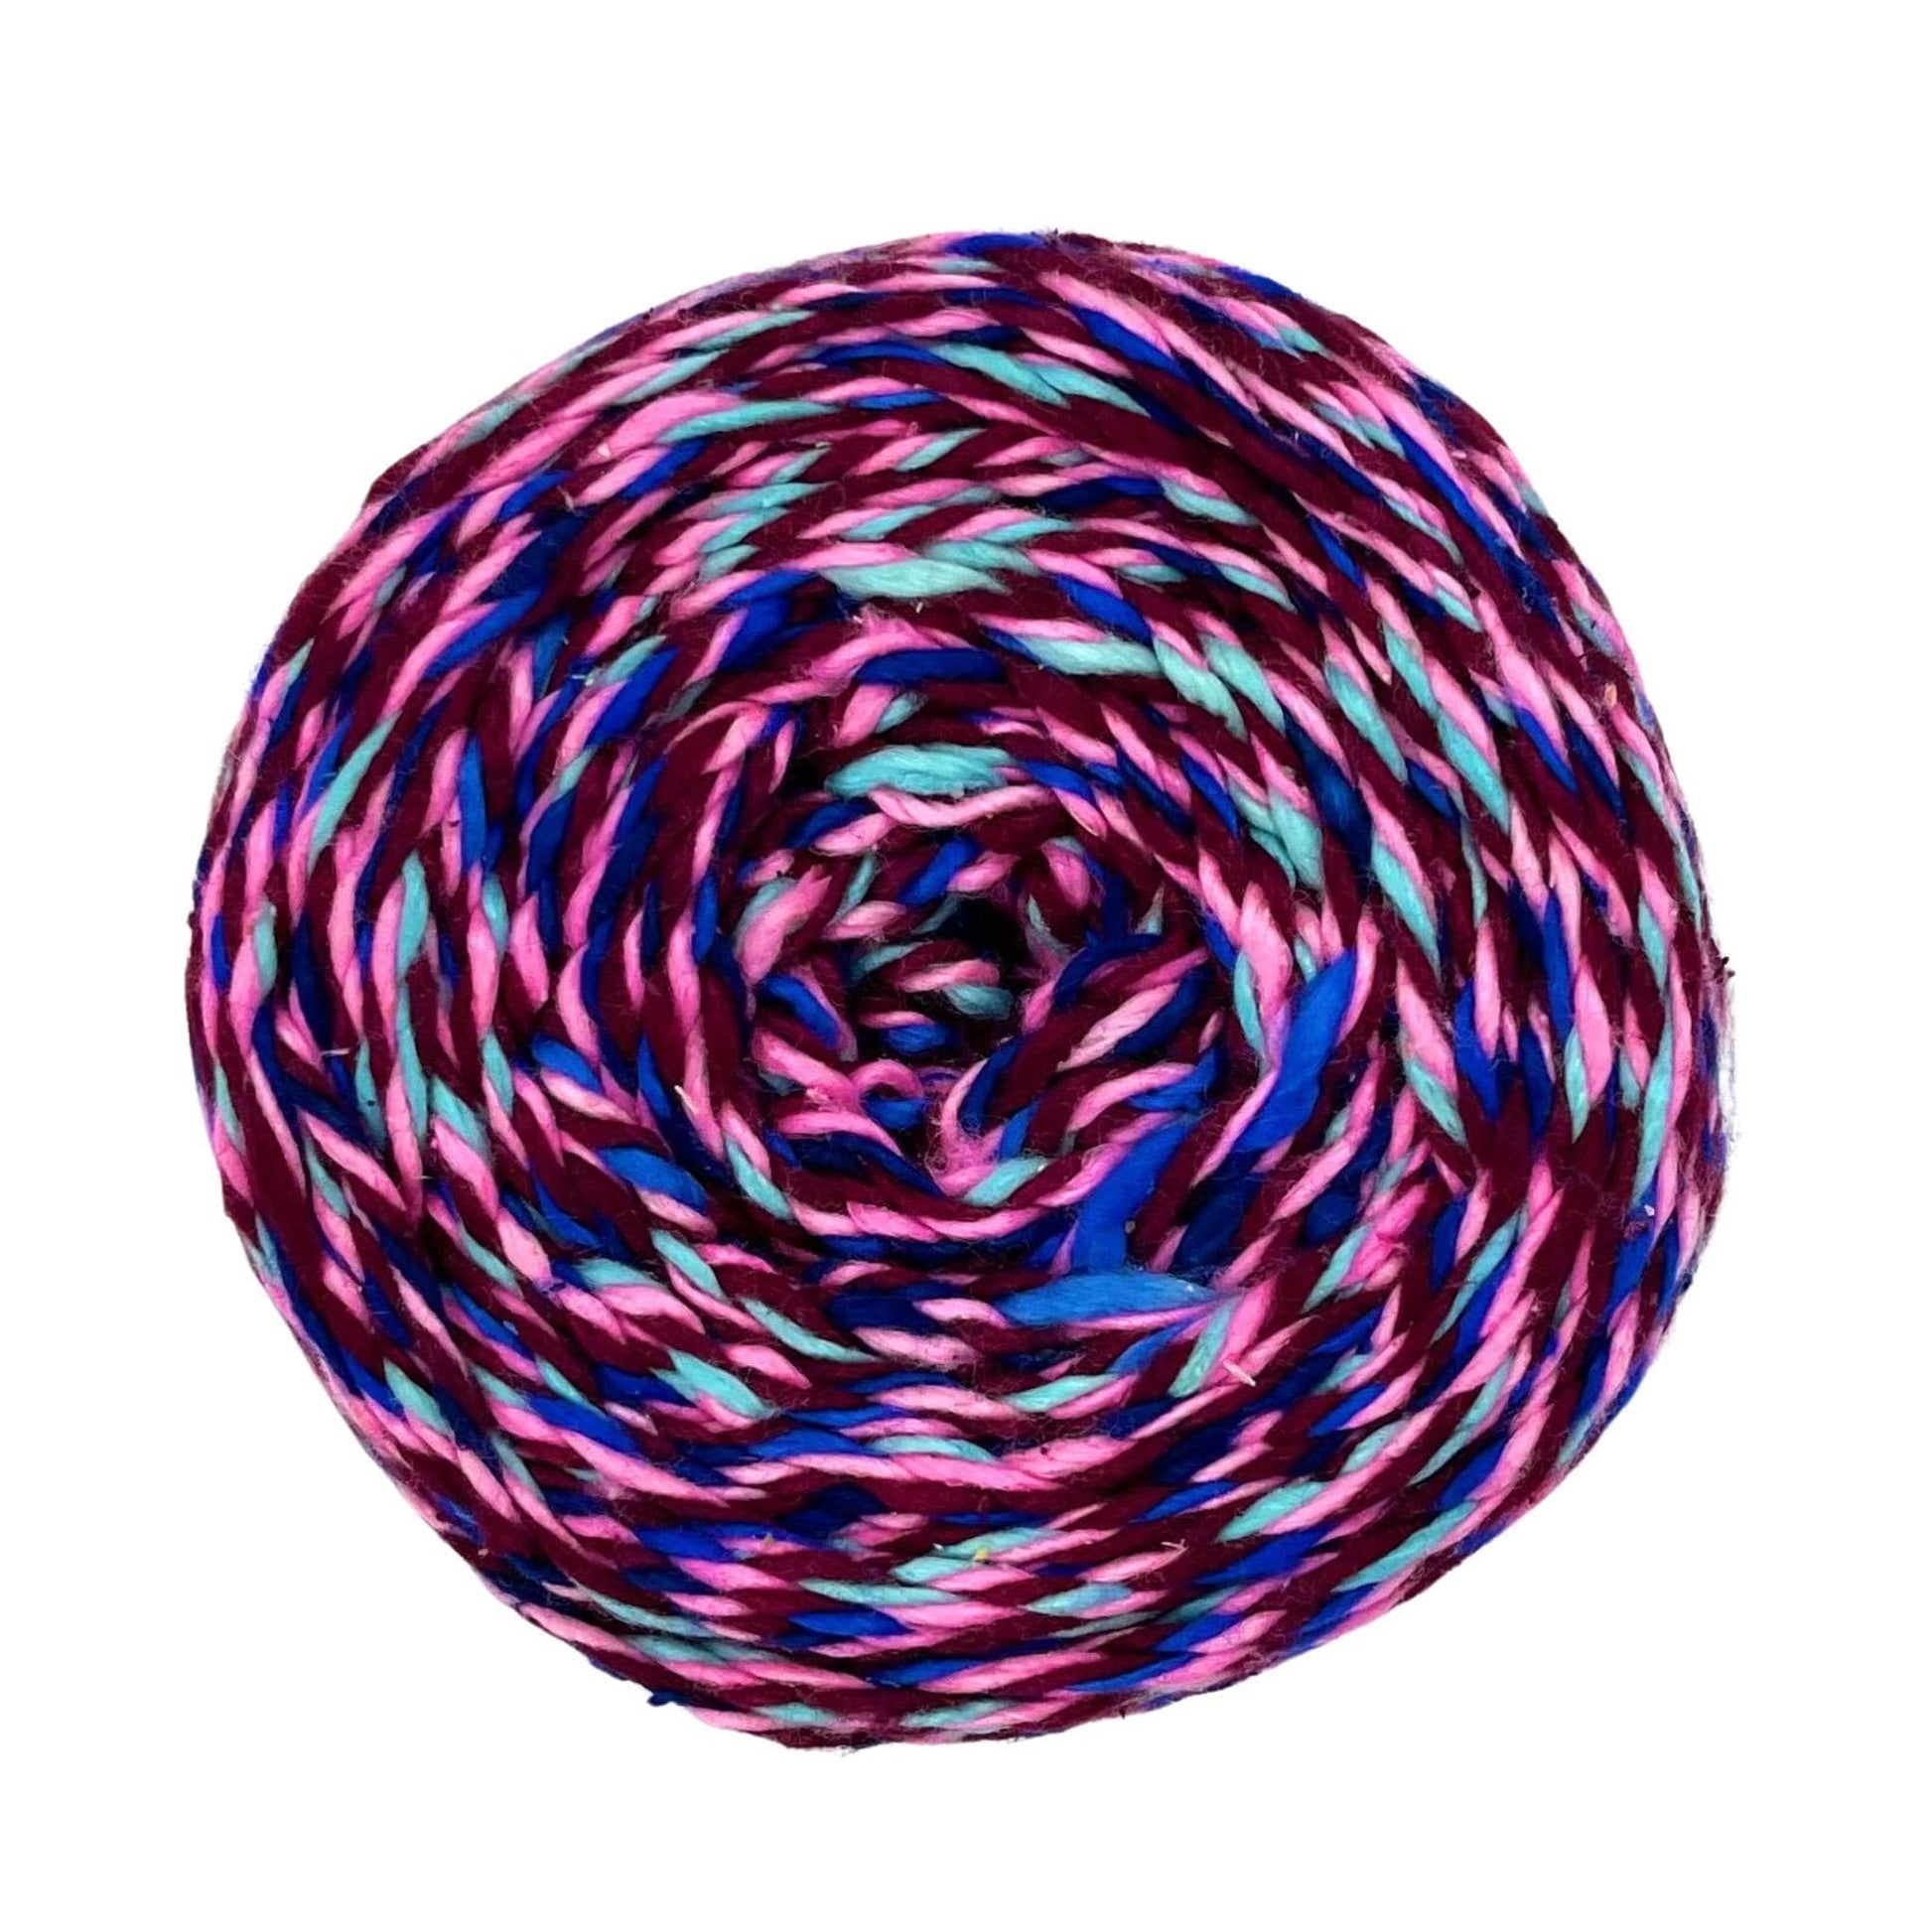 A skein of reclaimed silk yarn on a white background. The yarn is a triple ply yarn with dark plum, pink, turquoise navy and cobalt blue colors.